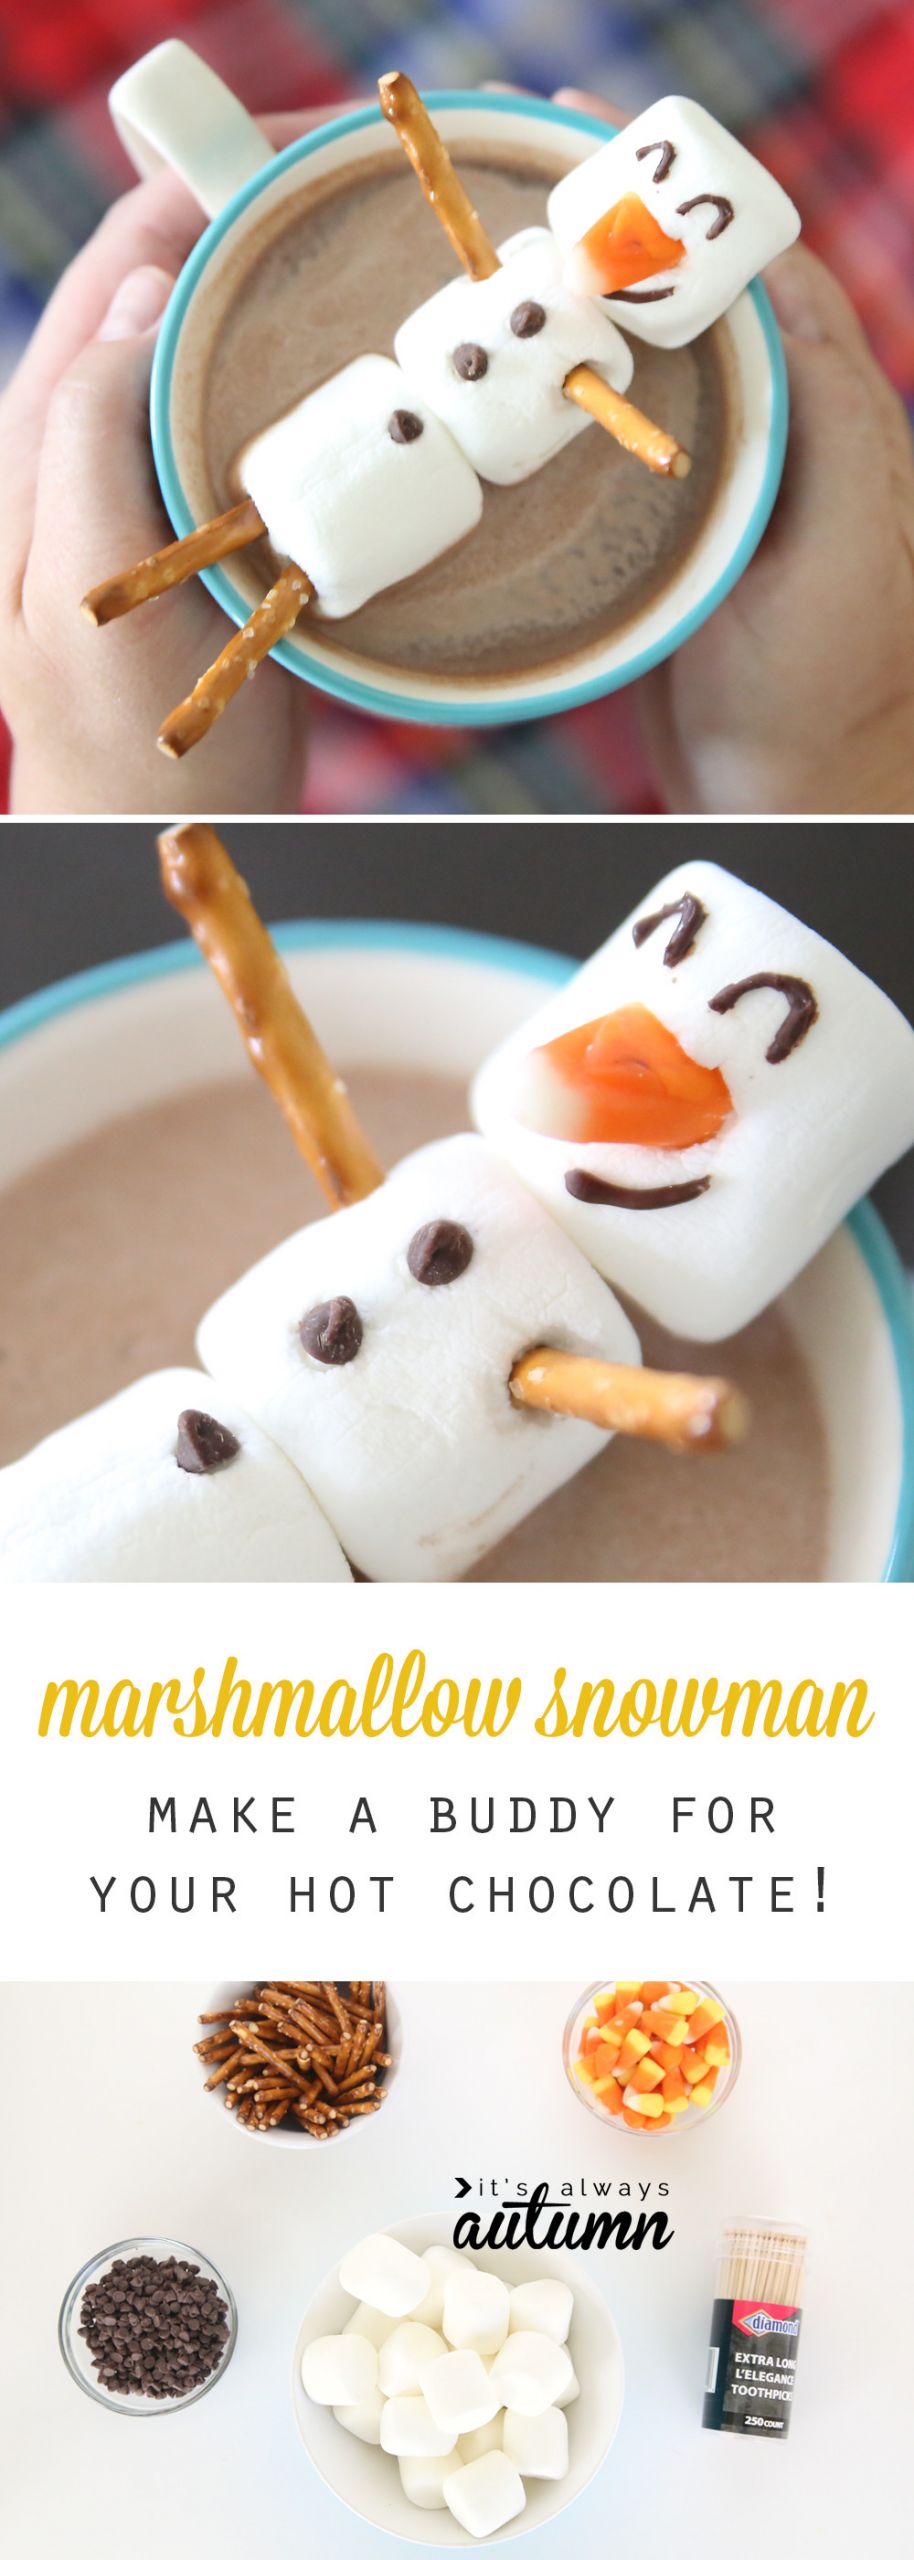 Craft Ideas For Preschool
 Over 30 Winter Themed Fun Food Ideas and Easy Crafts Kids